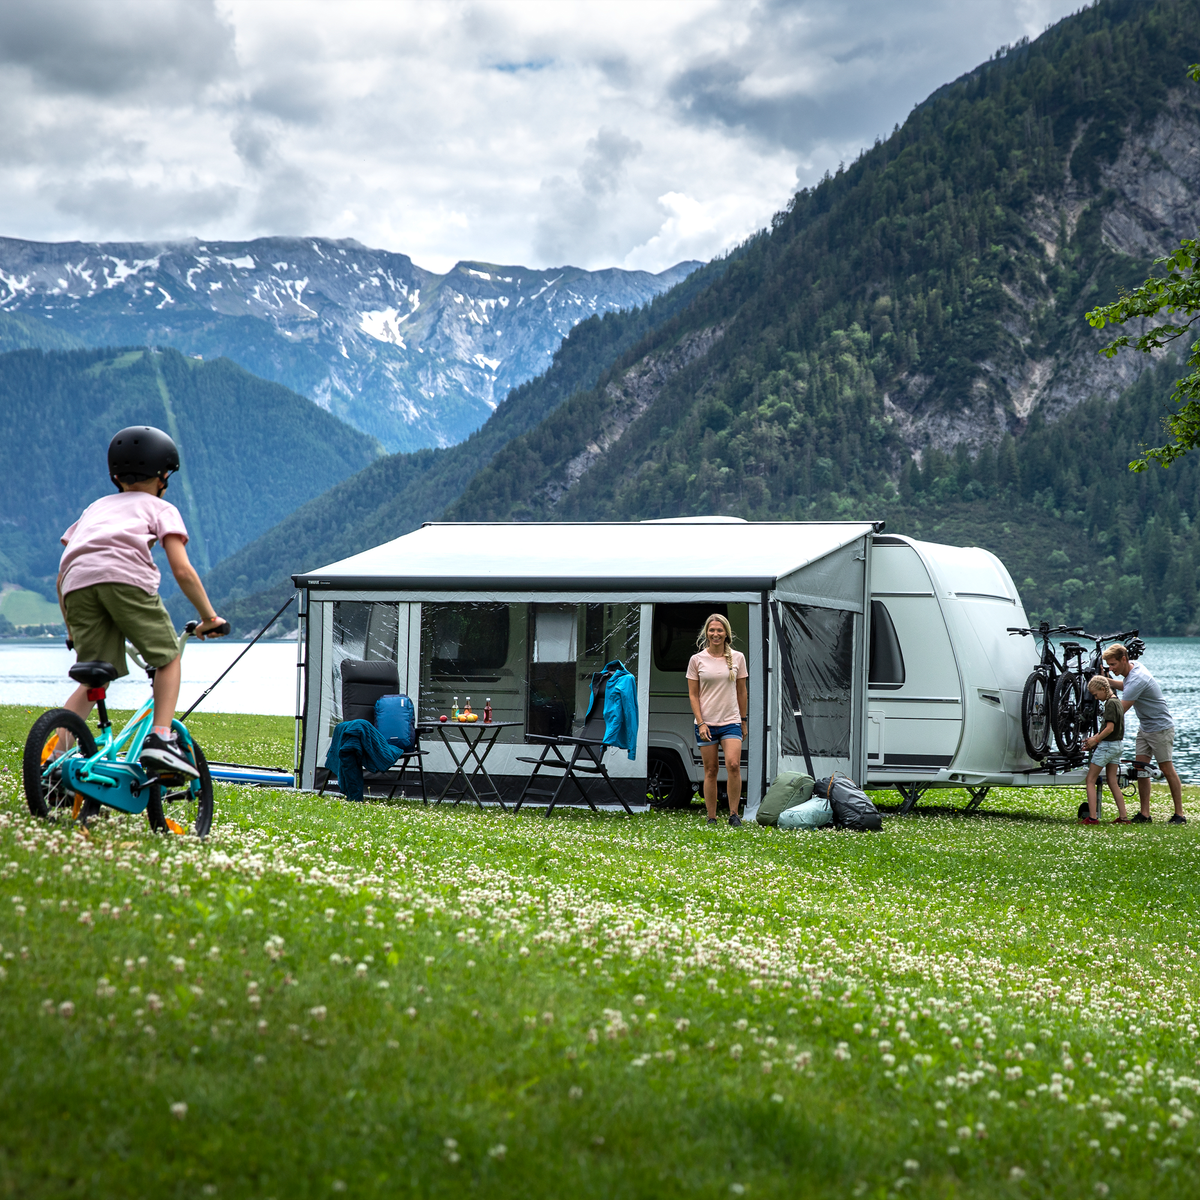 A motorhome parked next to the water parked in the mountains with a Thule Residence G3 rv awning tent.